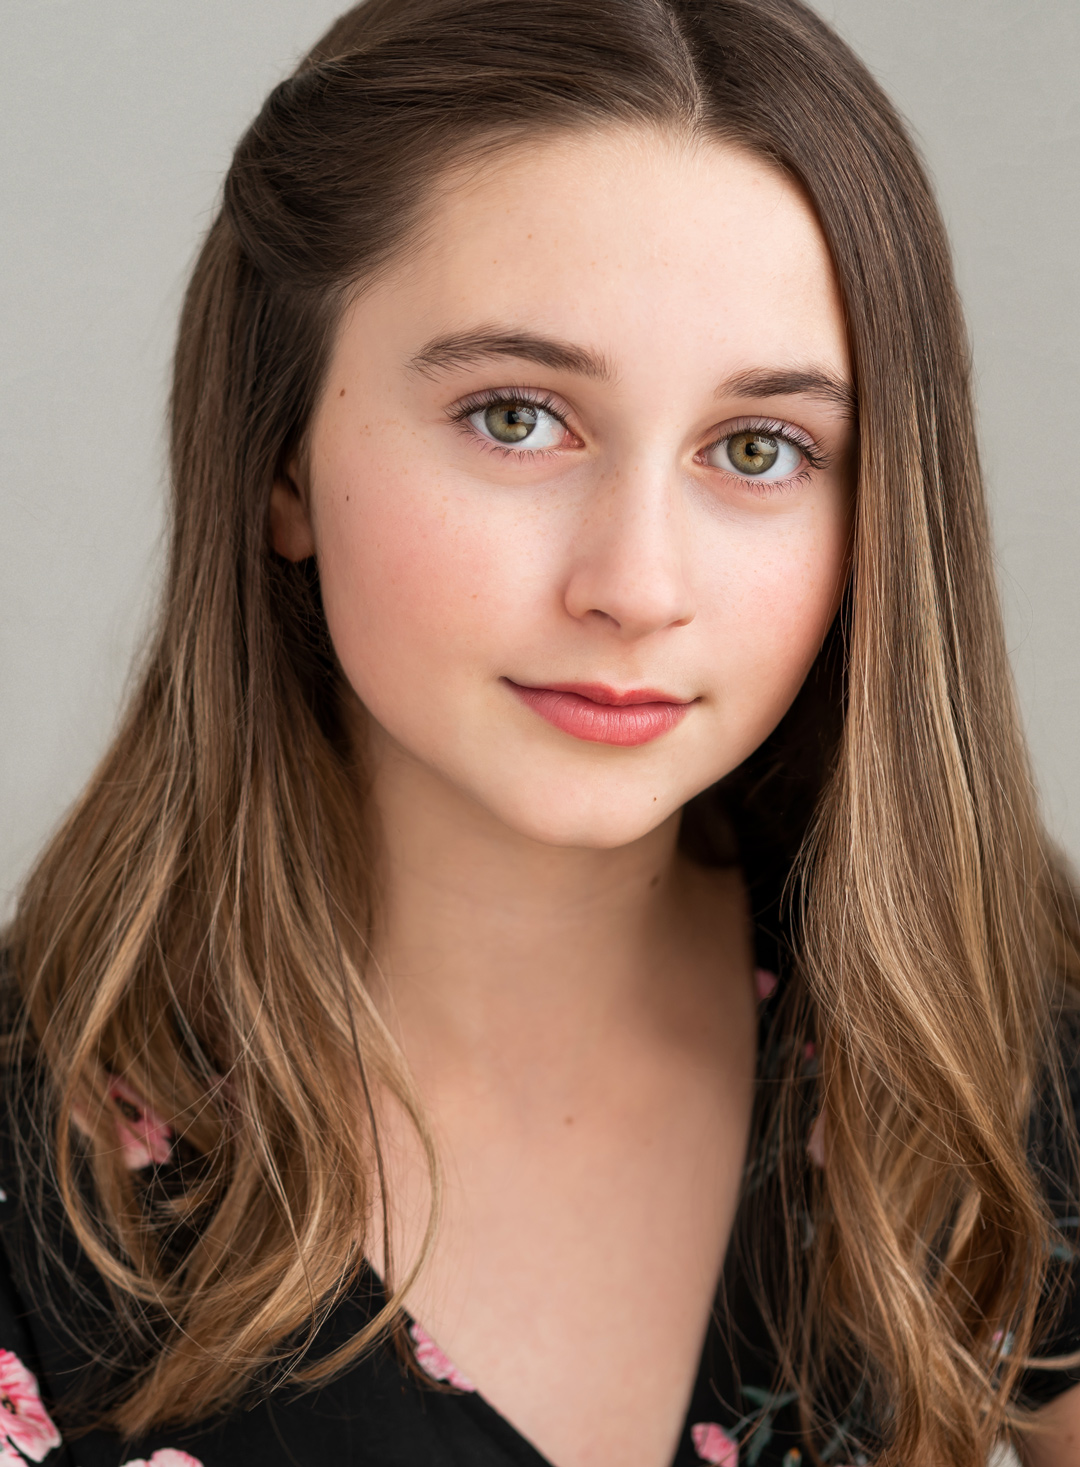 Teen actress represented by Characters talent agency